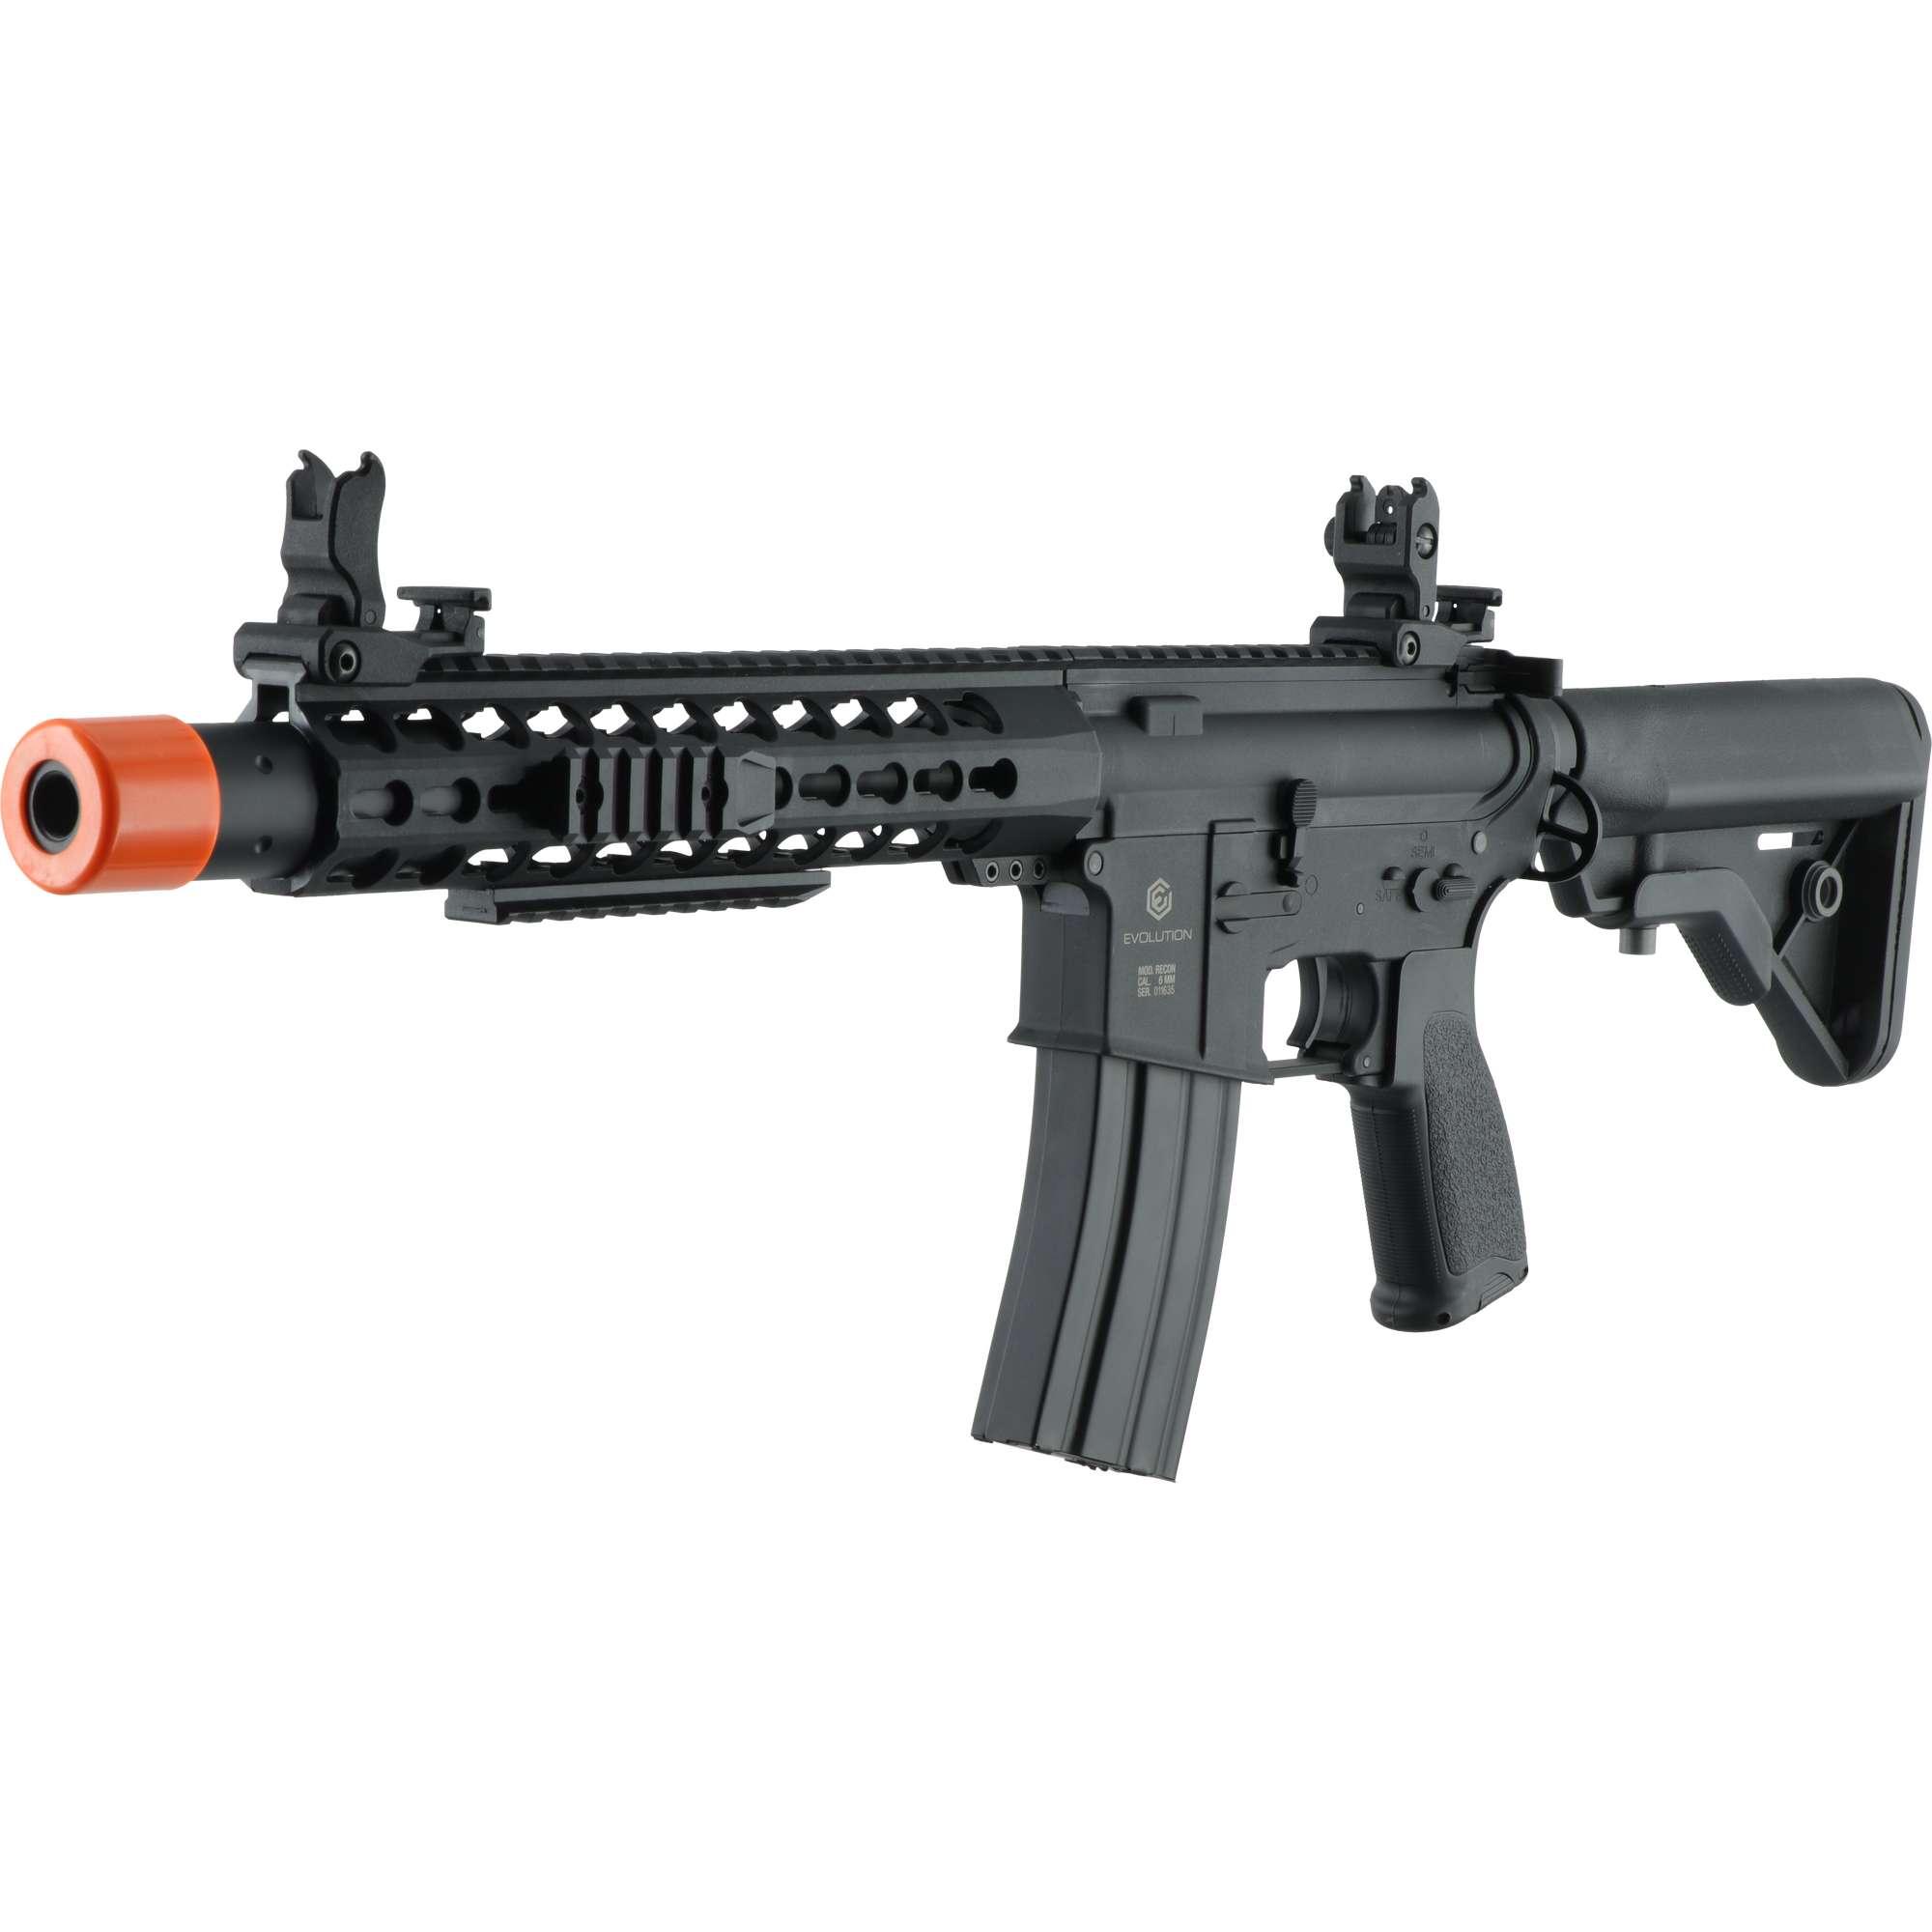 Evolution Recon S10 Carbontech Airsoft Rifle Black 6mm